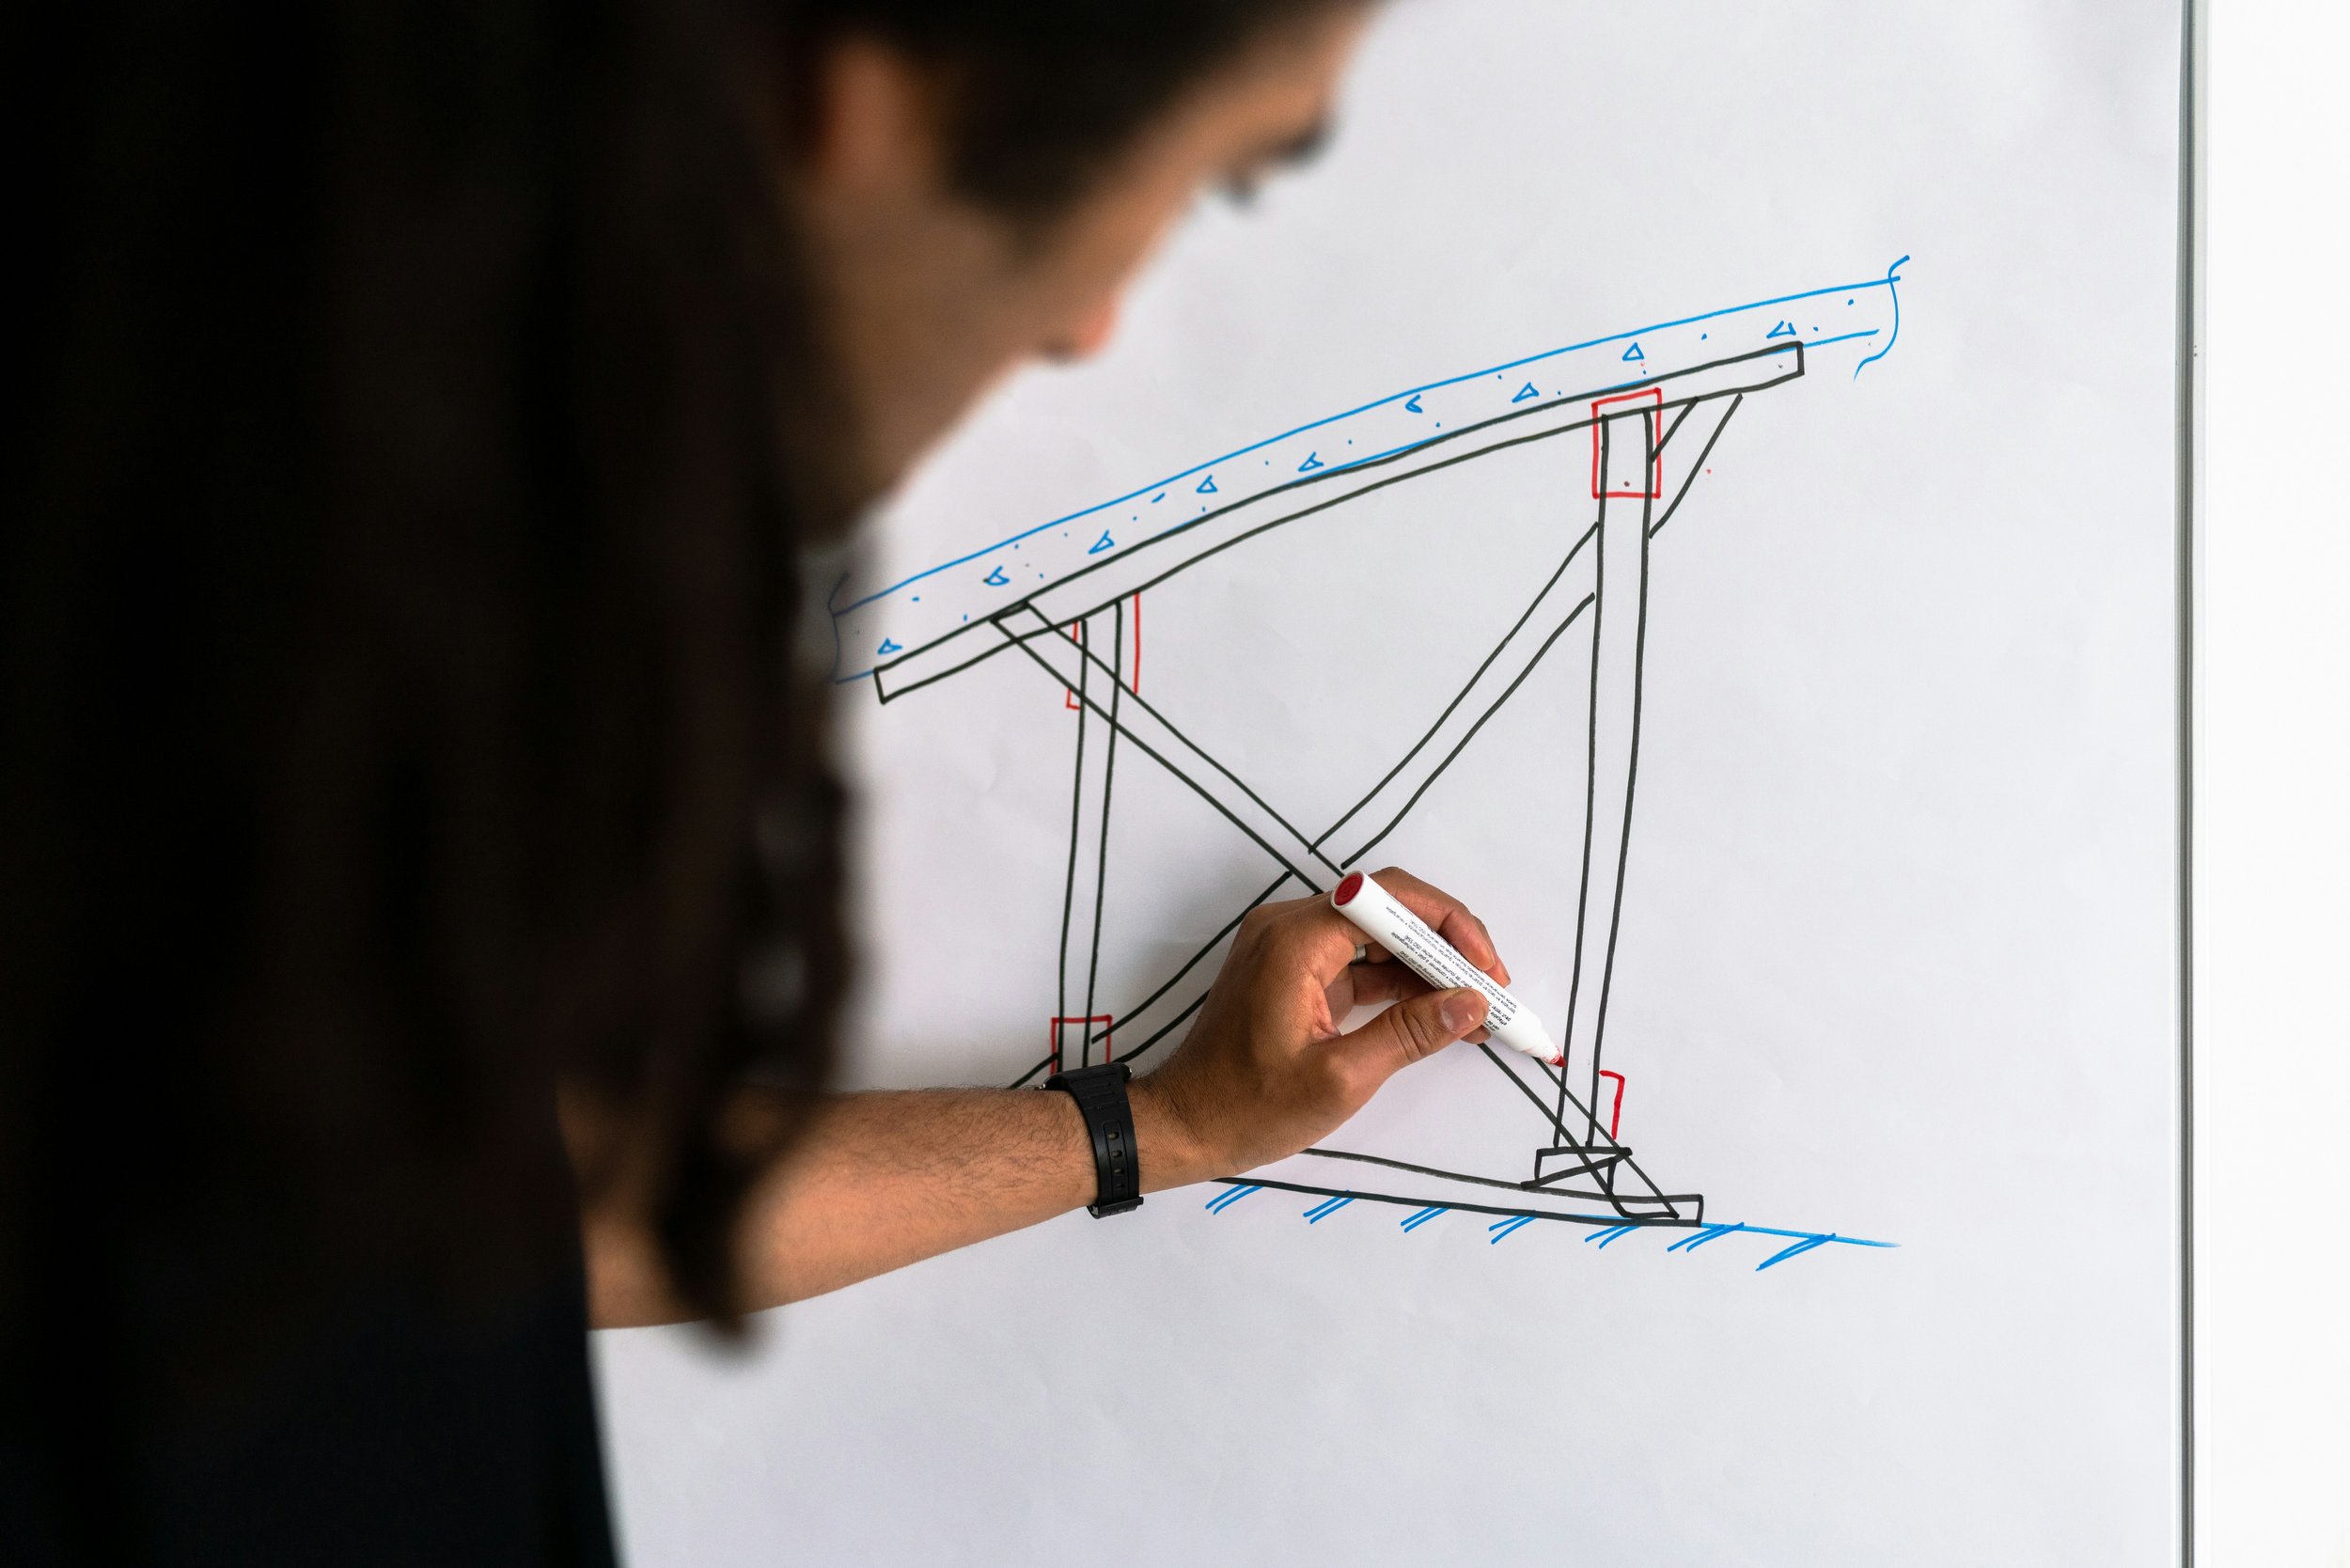 A photograph of a designer drawing on a whiteboard